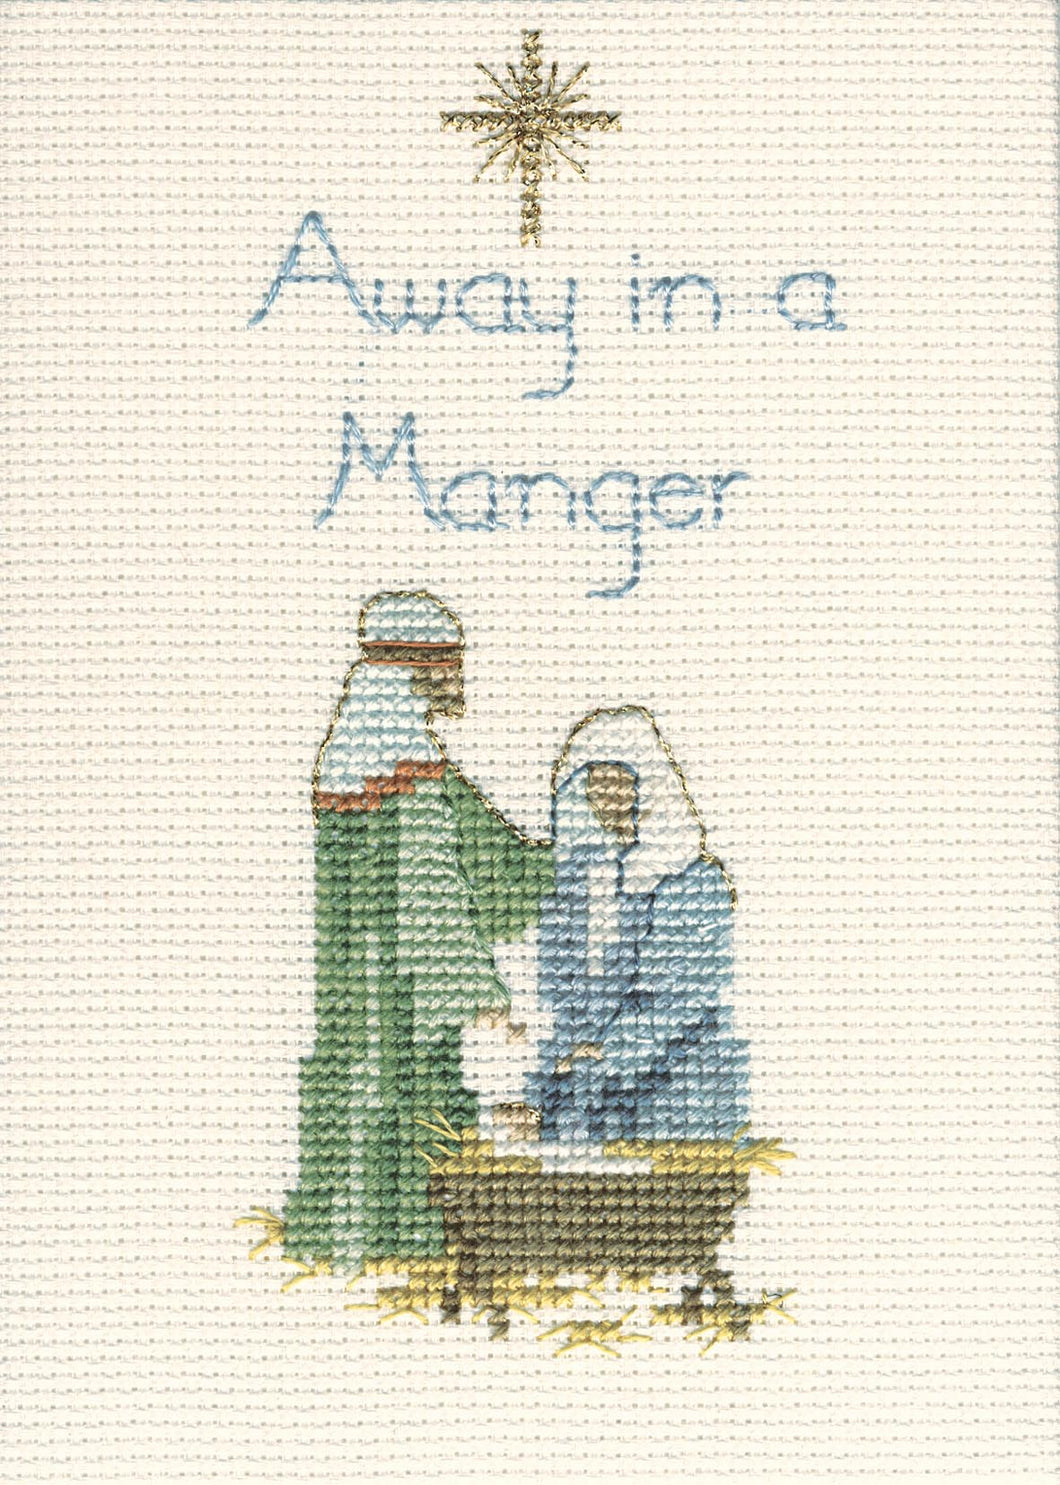 Away in a Manger - Christmas Card Cross Stitch Kit